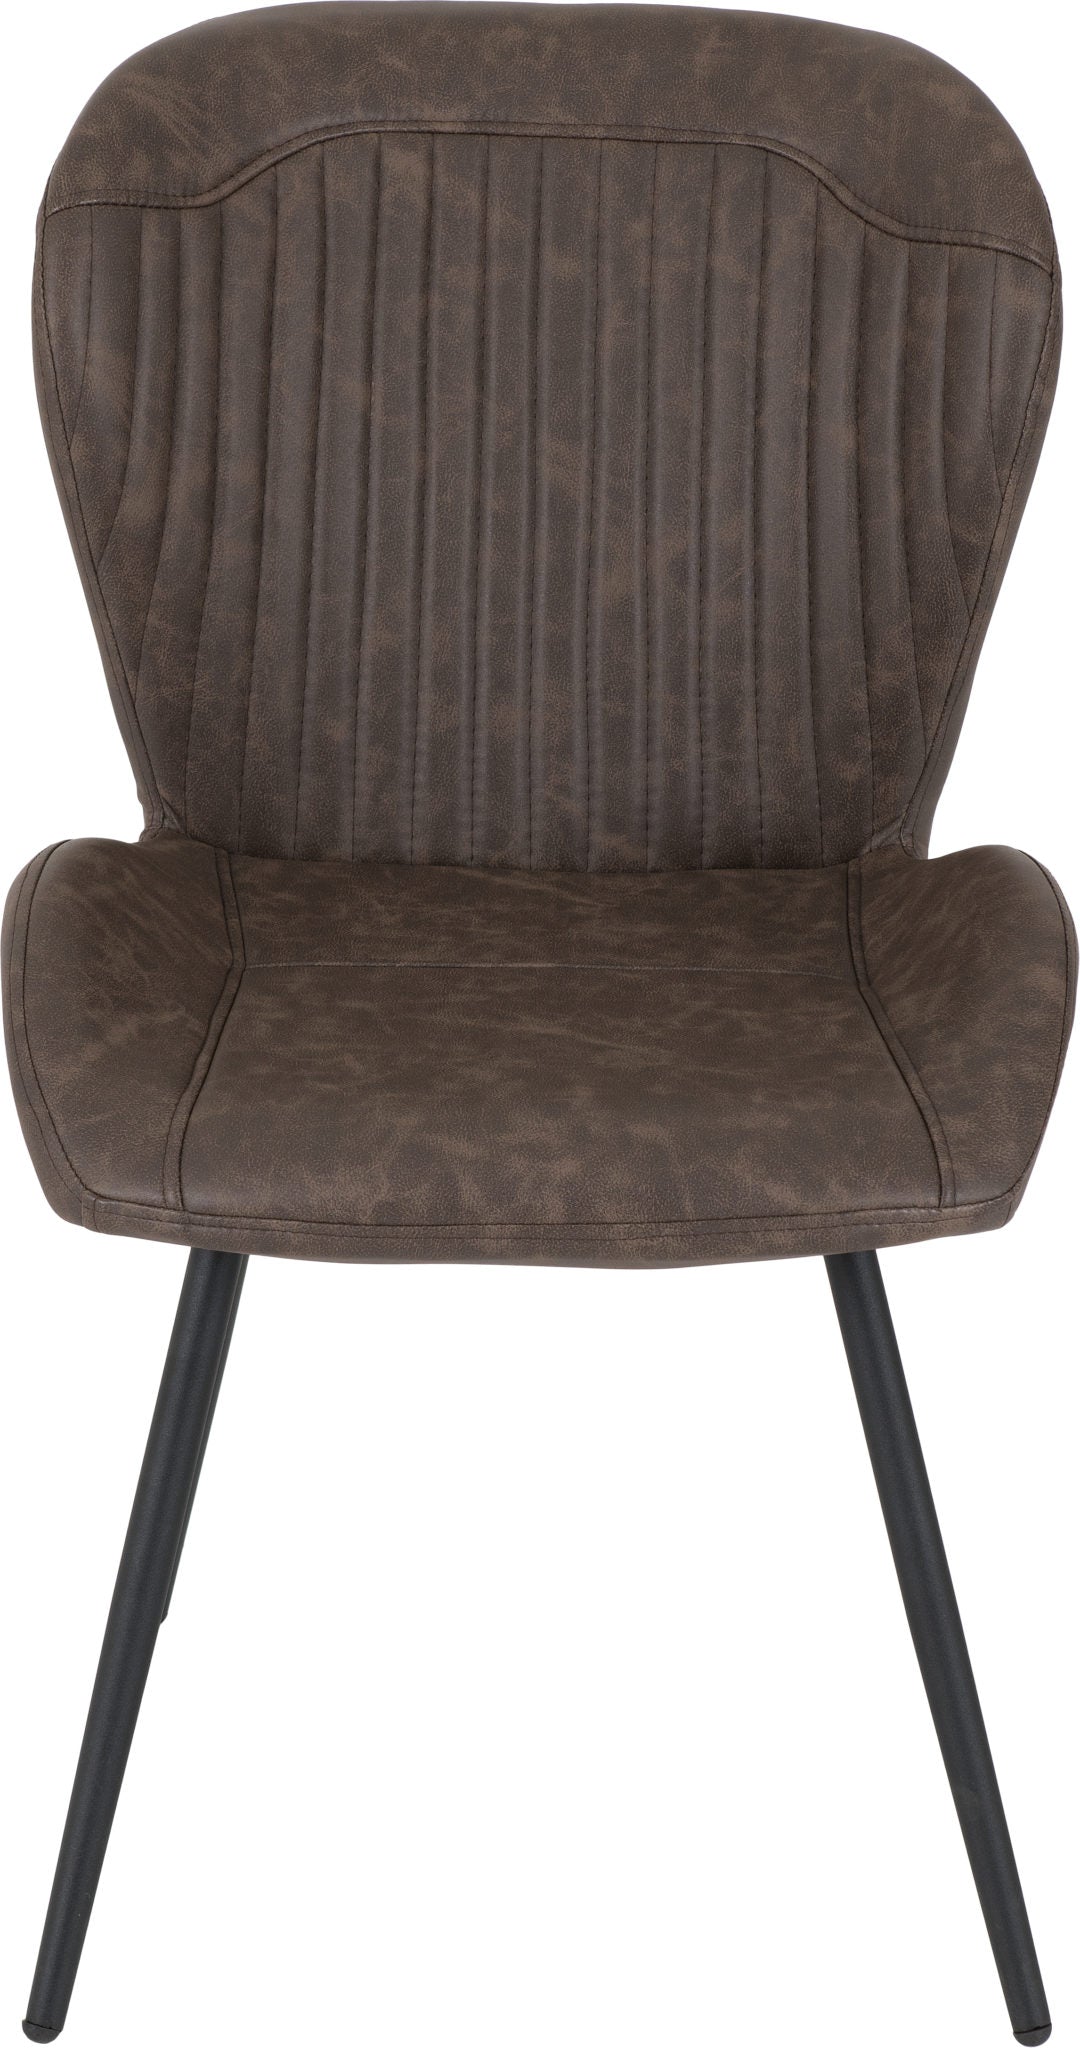 QUEBEC-DINING-CHAIR-BROWN-PU-2020-400-402-103-01-scaled.jpg